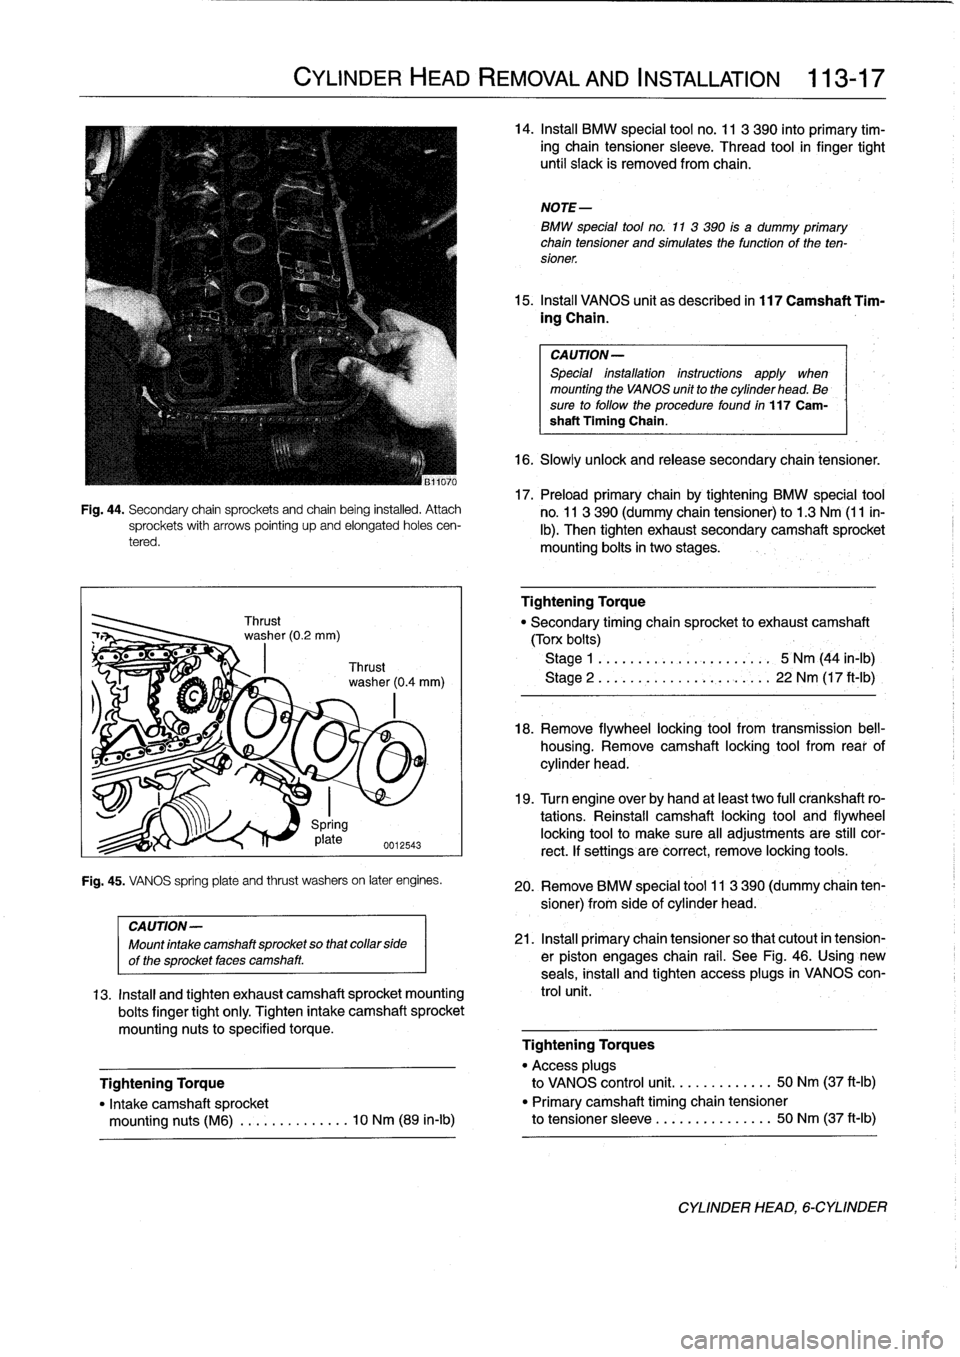 BMW 325i 1994 E36 Workshop Manual 
Fig
.
44
.
Secondary
chain
sprockets
and
chain
being
installed
.
Attachsprockets
with
arrows
pointing
upand
elongated
holes
cen-
tered
.

CYLINDER
HEAD
REMOVAL
AND
INSTALLATION

	

113-17

Spring
17
